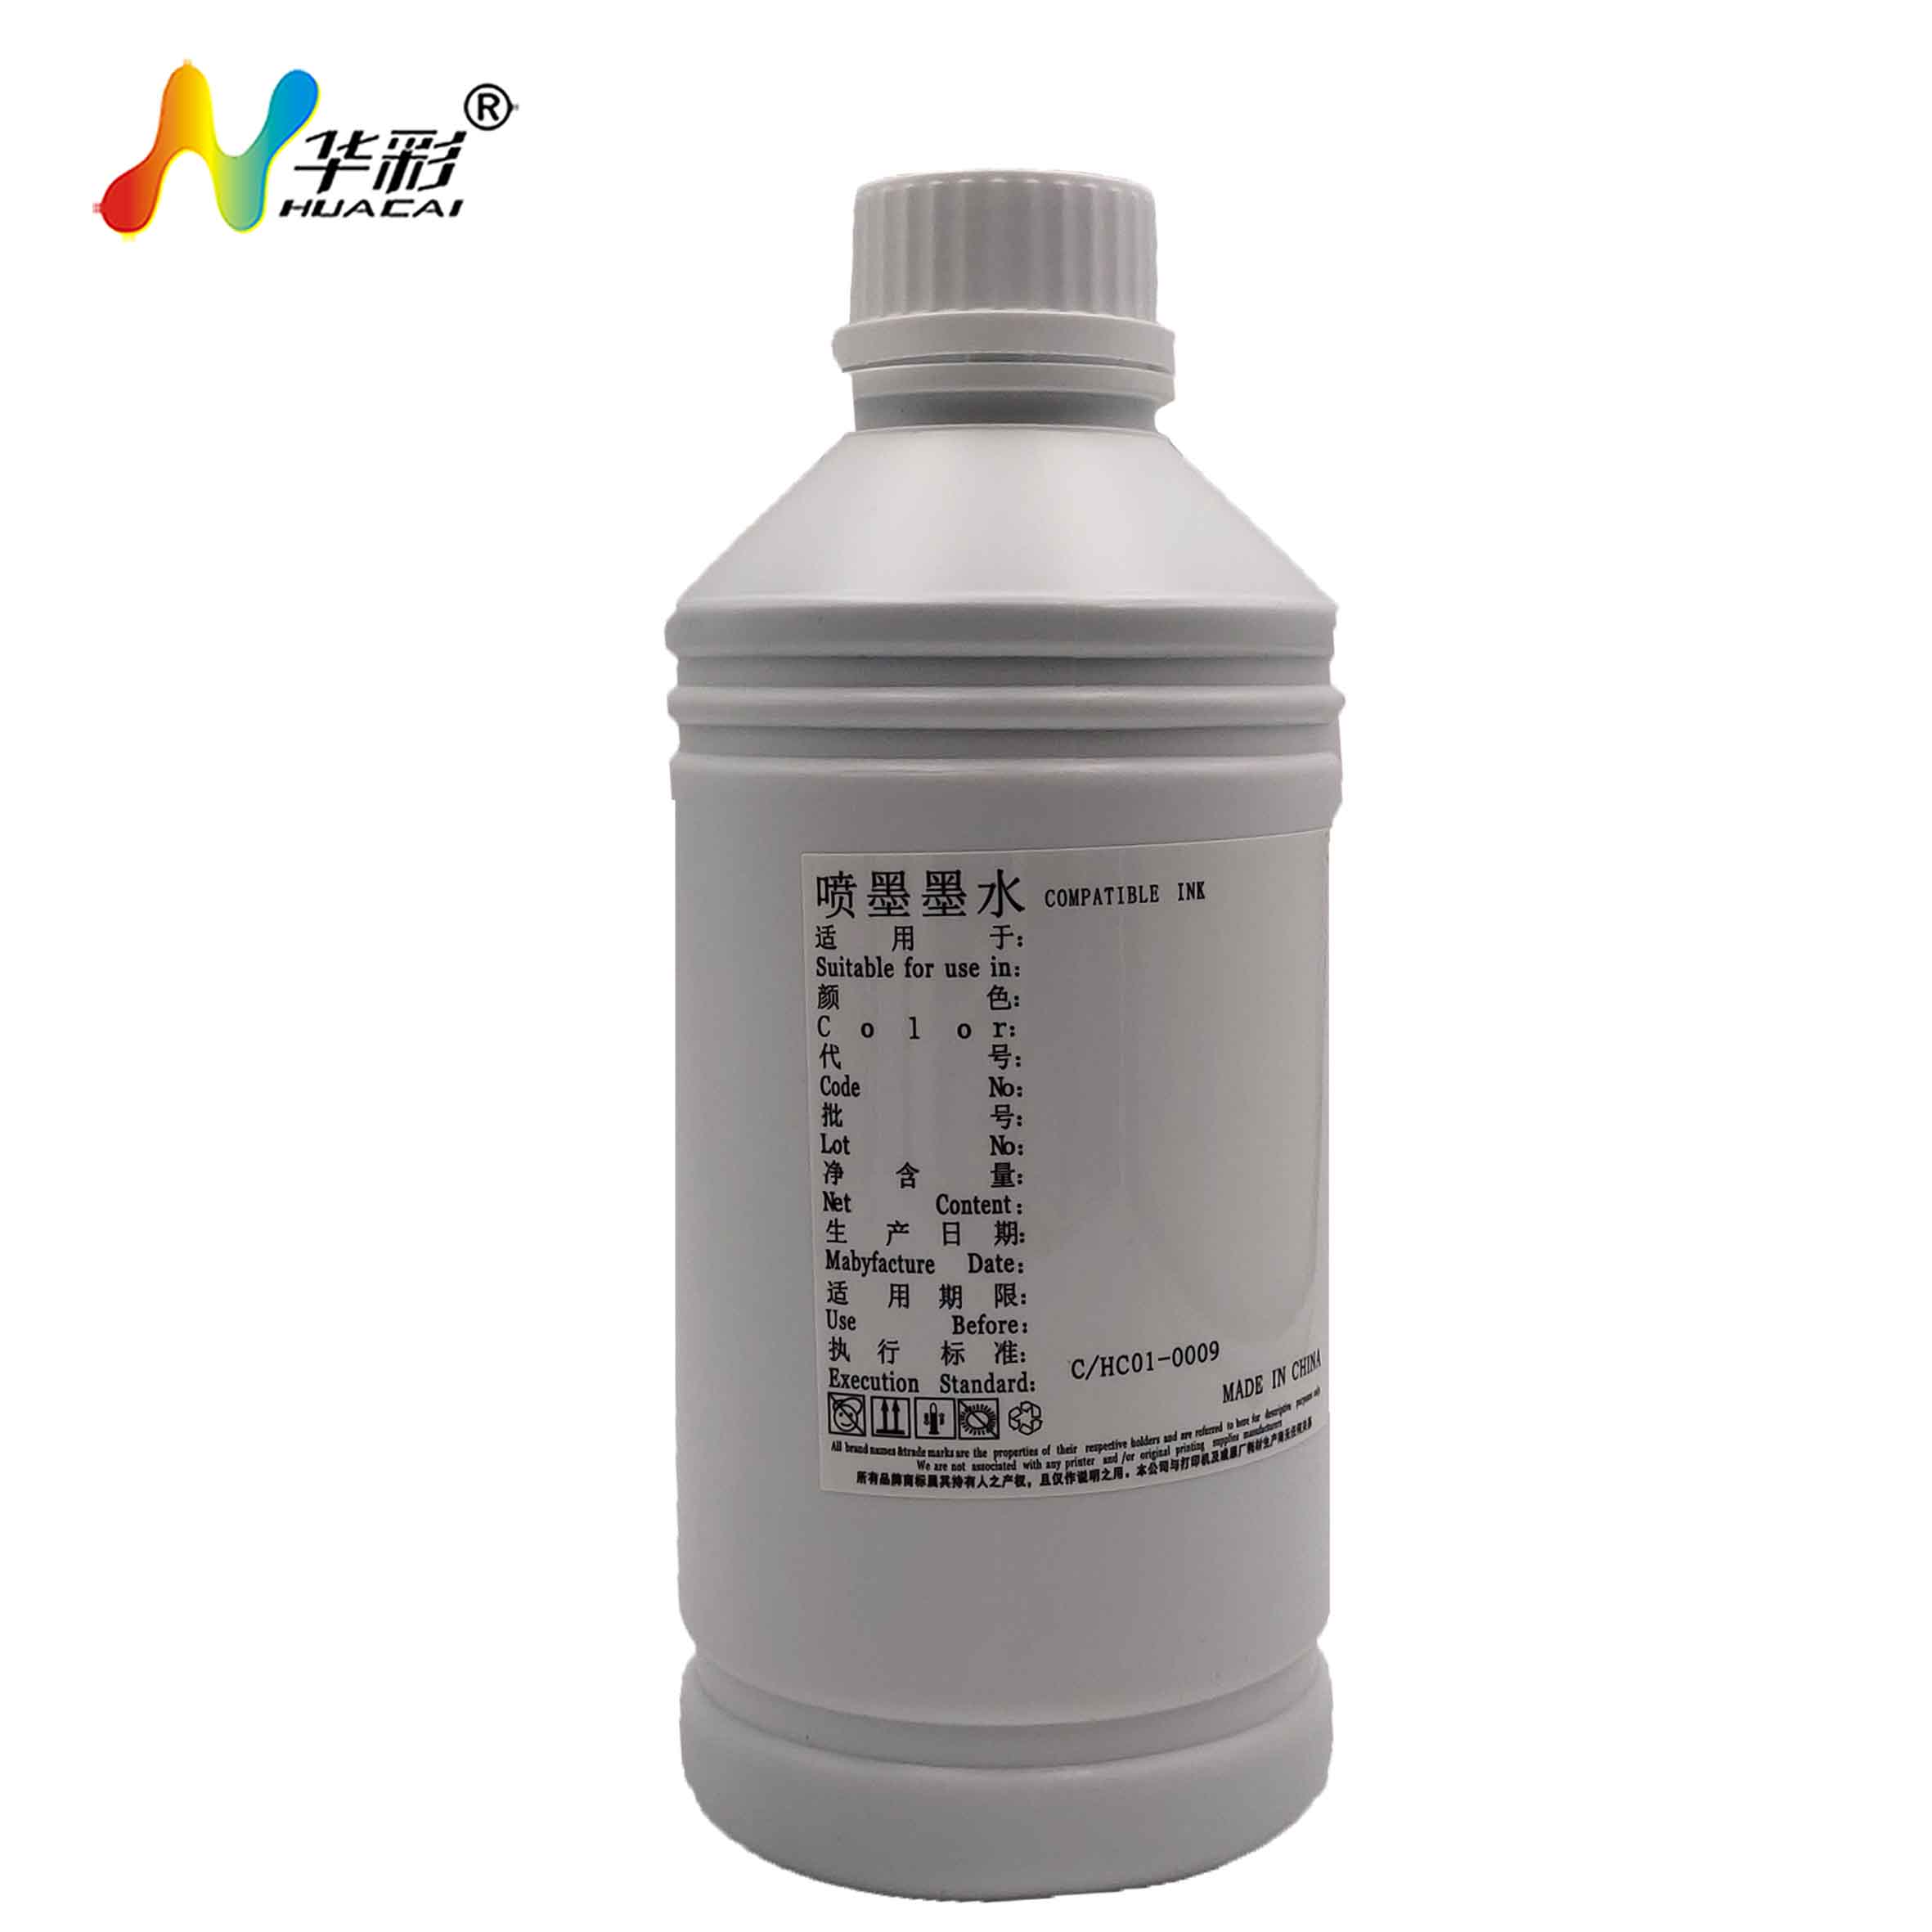 HP solvent Ink